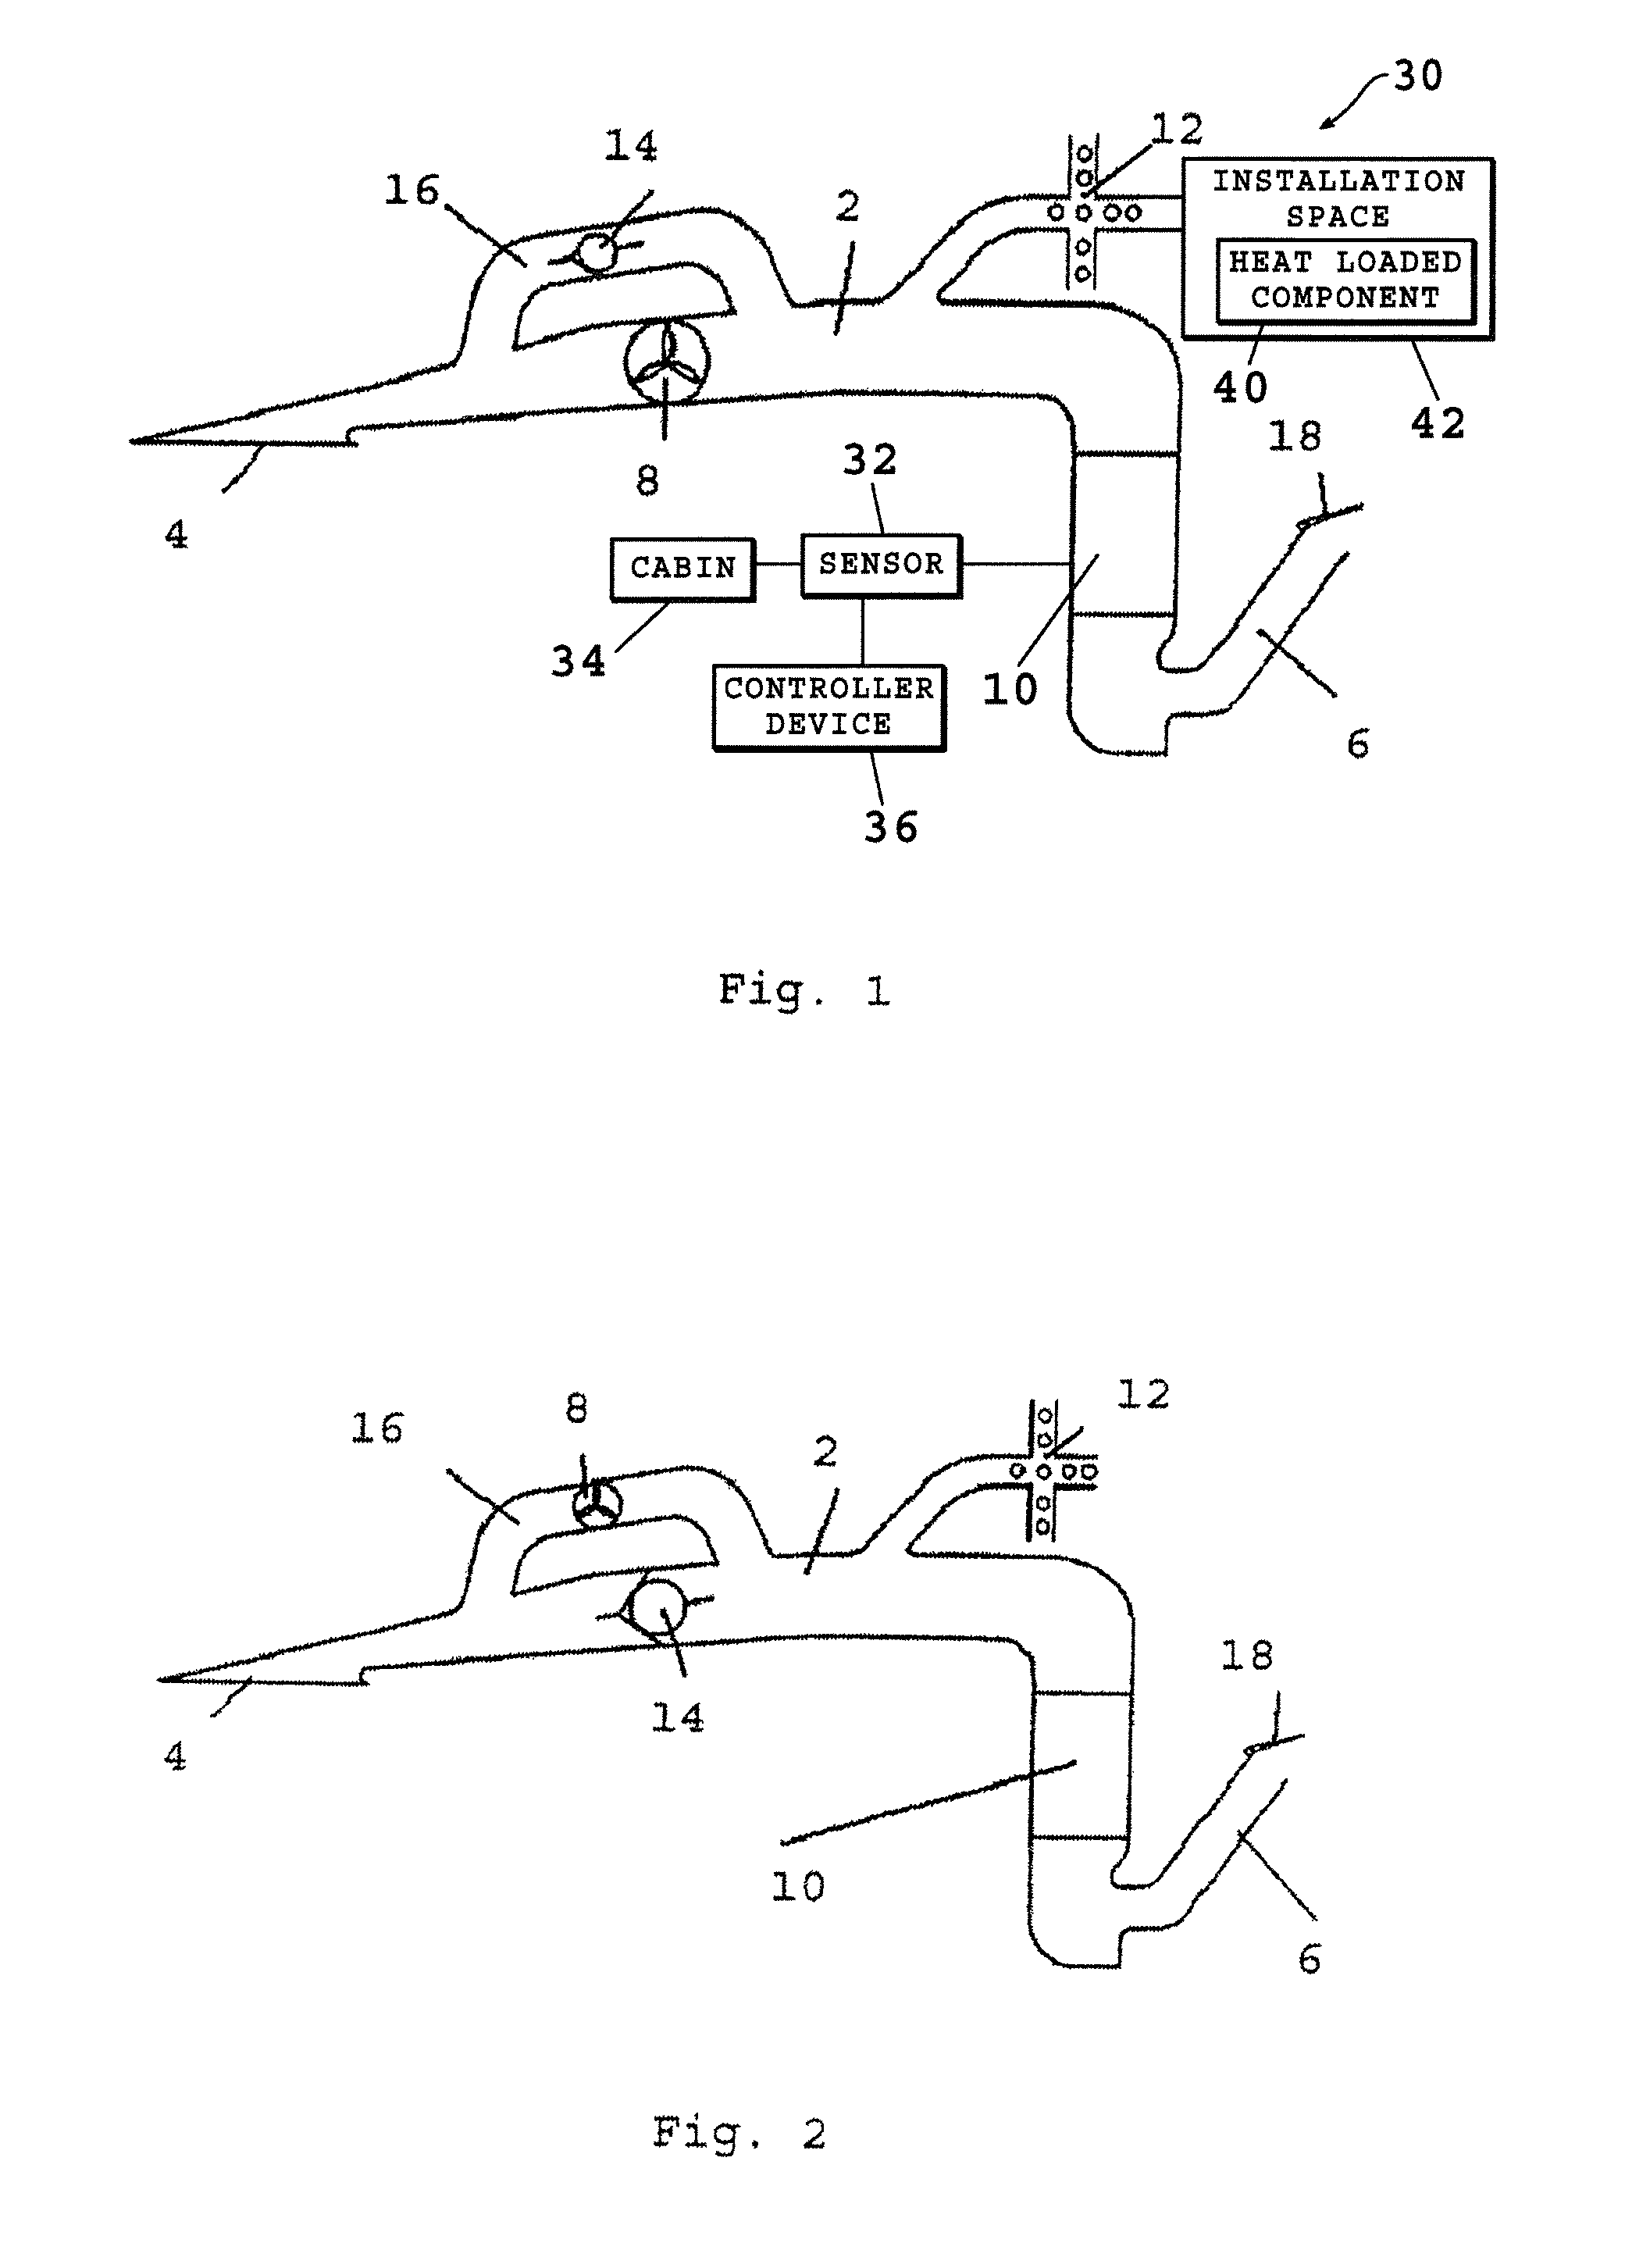 Ram air based cooling and ventilation system for an aircraft